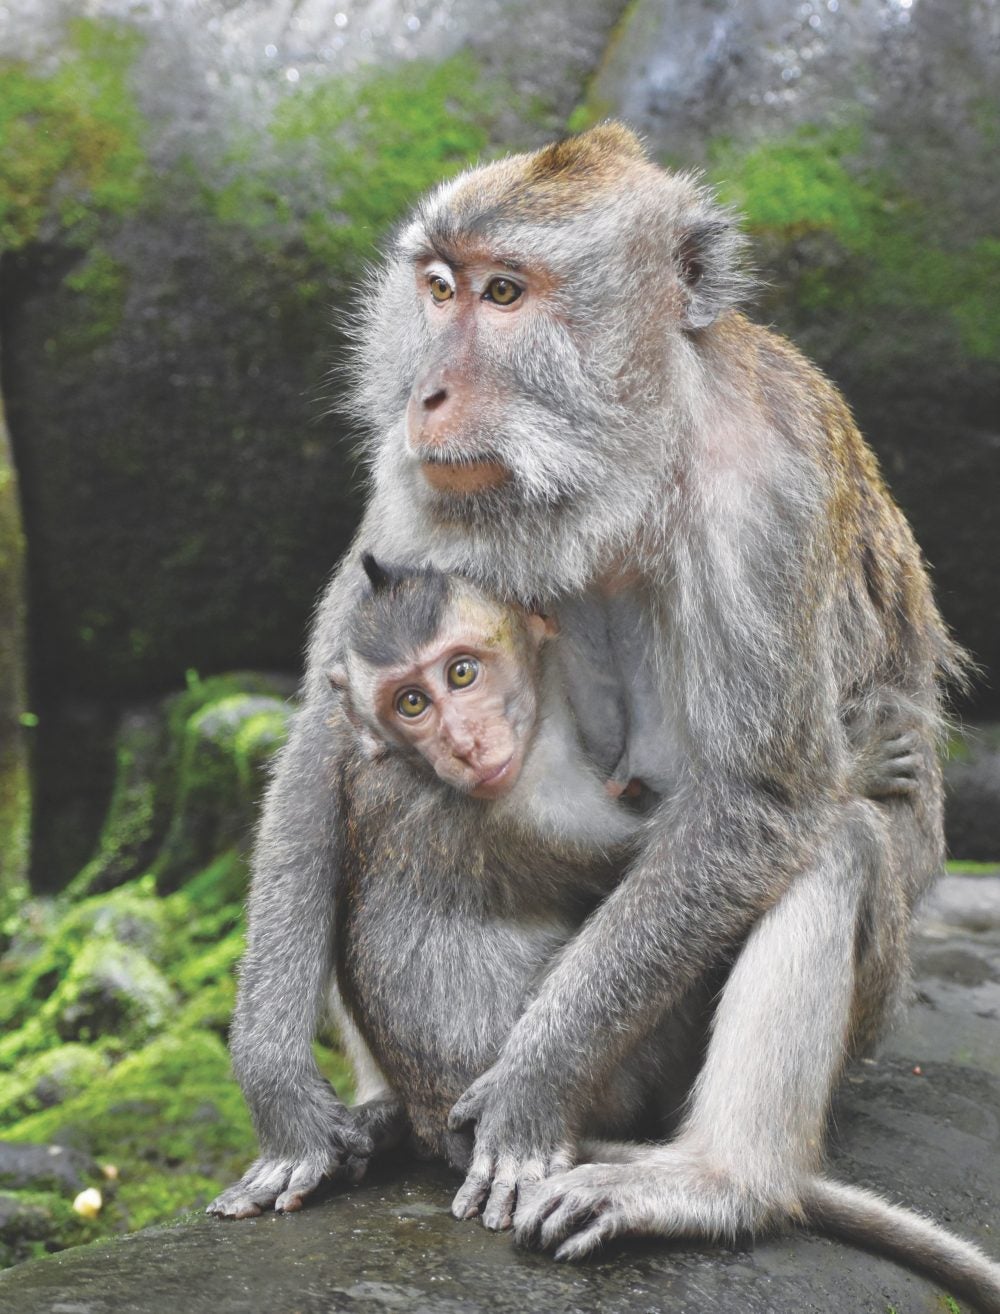 A young macaque clings to its mother at the local watering hole in Ubud, Bali, Indonesia